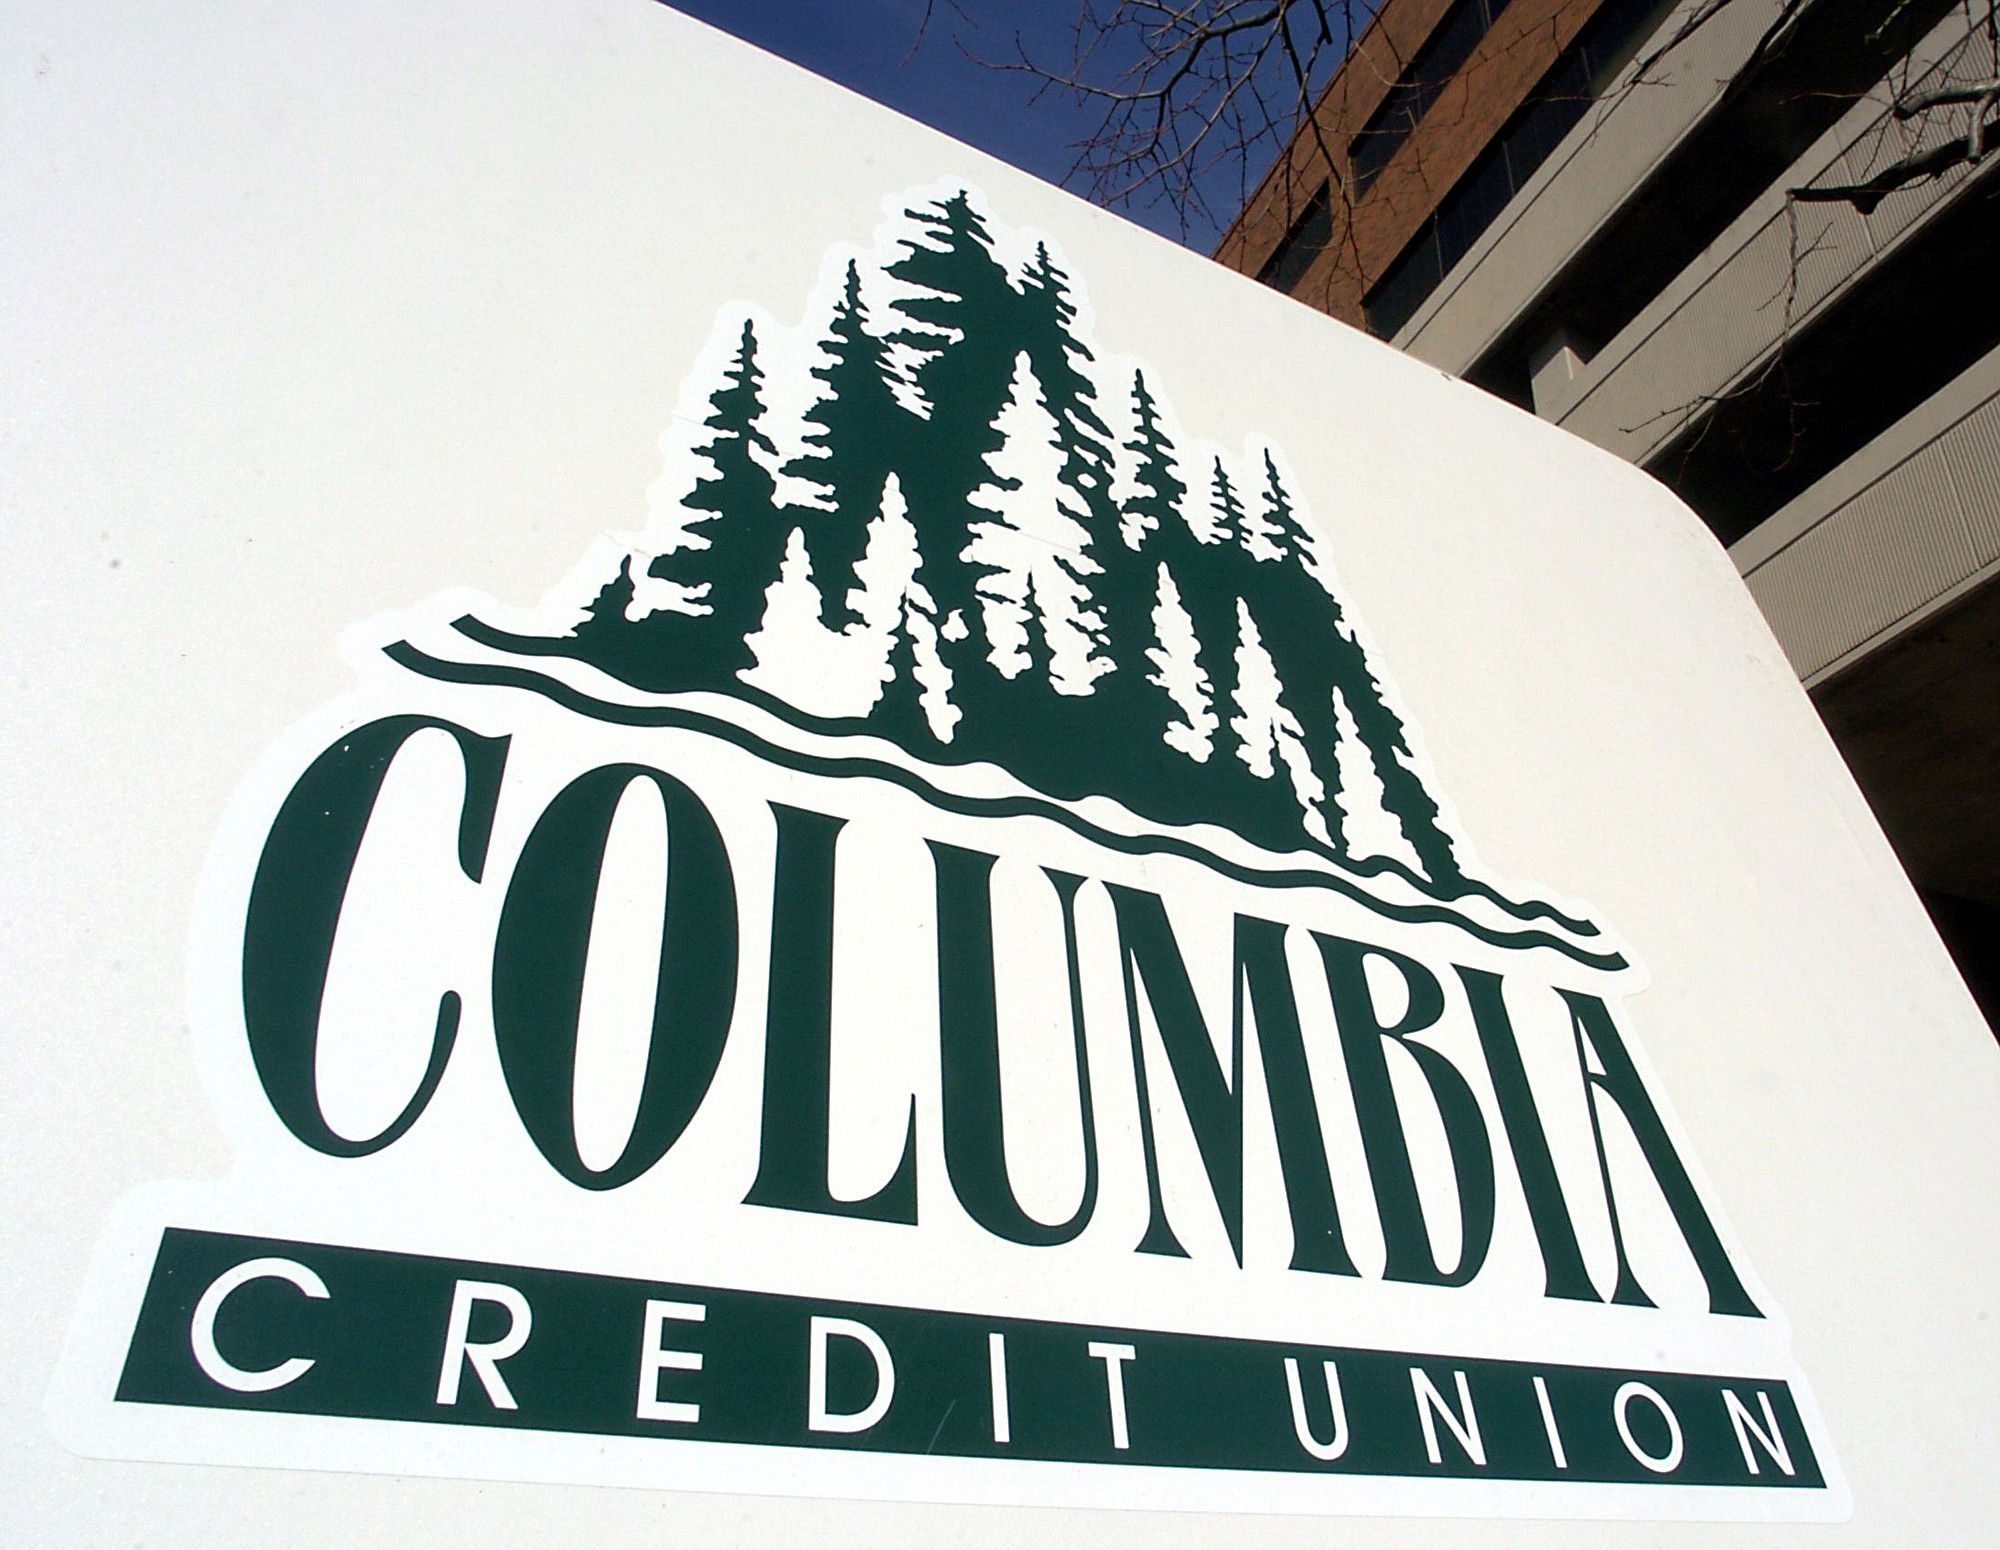 3/1/04 - Photo by Dave Olson - Columbia Credit Union sign at its downtown branch --- on Broadway between 7th and 8th Sts.